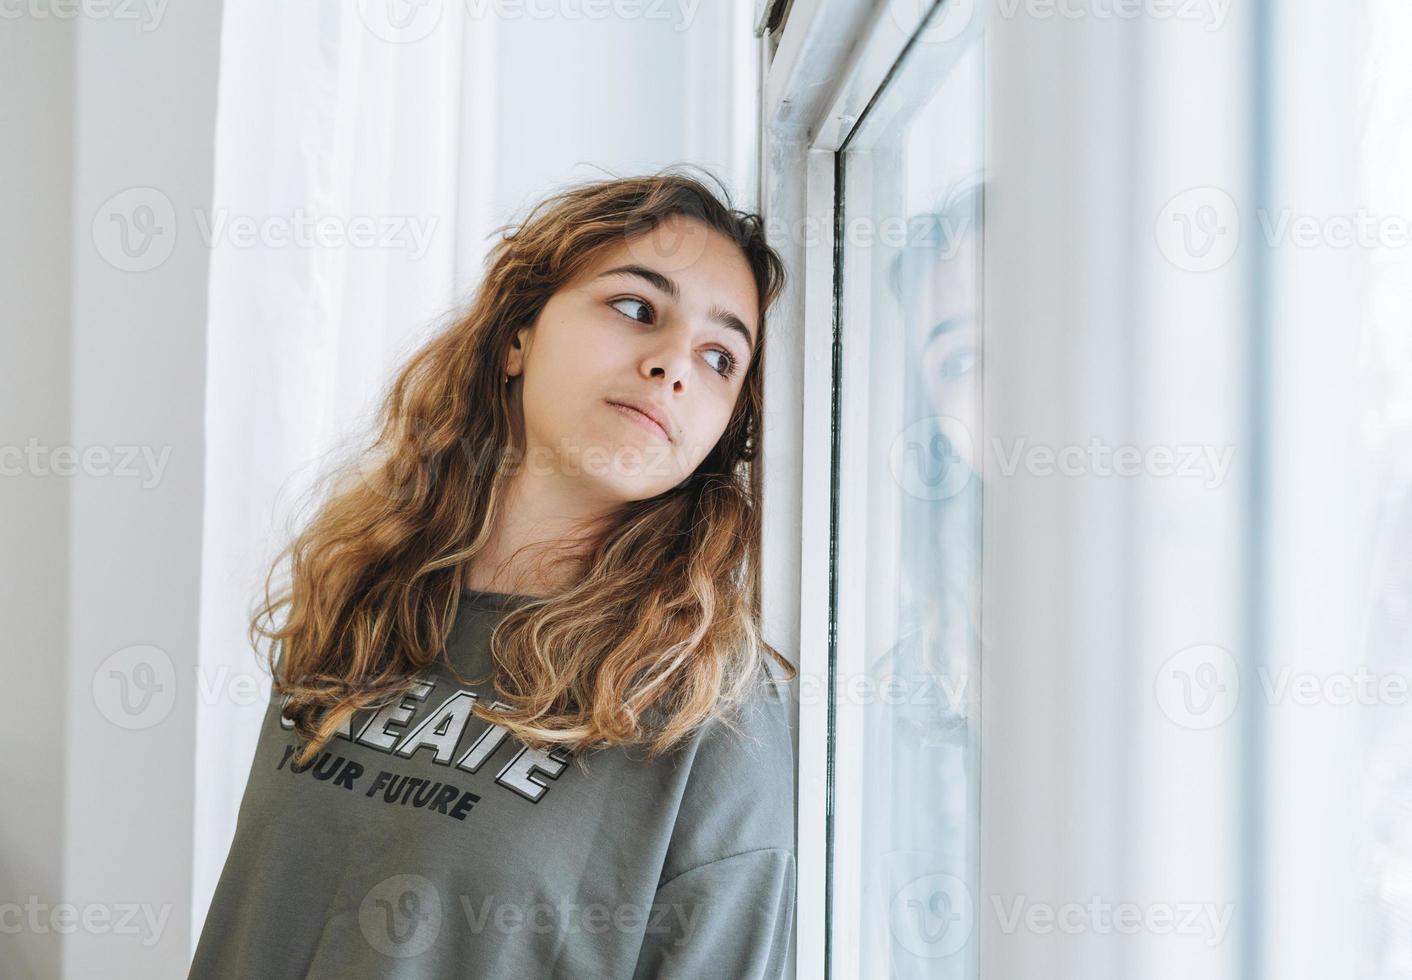 Beautiful sad unhappy teenager girl with curly hair sitting on the window sill photo